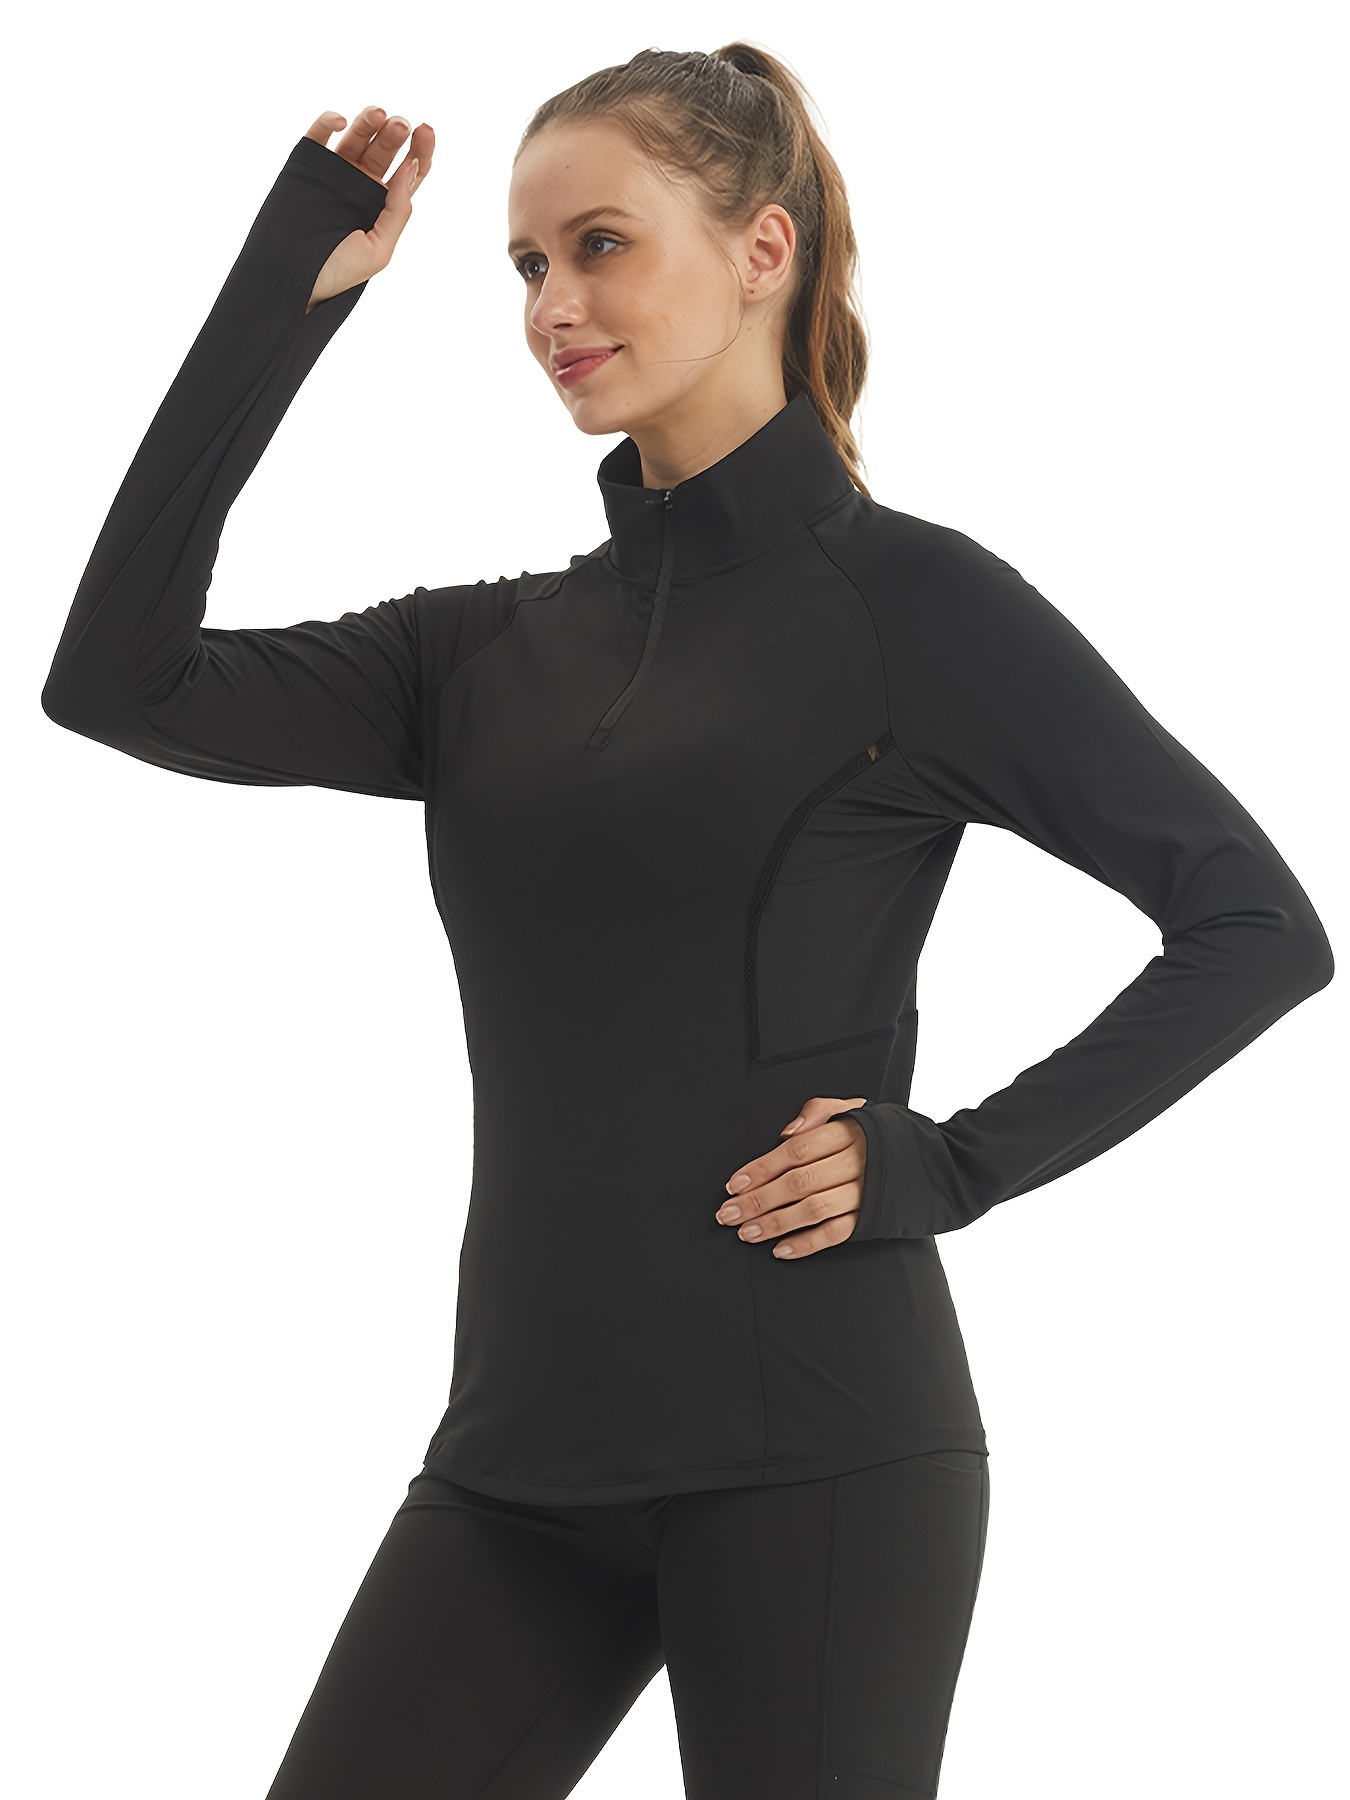  Running Shirts Women Long Sleeve Mock Neck Workout Yoga Tops  Fitted Athletic Tees with Thumb Holes(Black,XS) : Clothing, Shoes & Jewelry